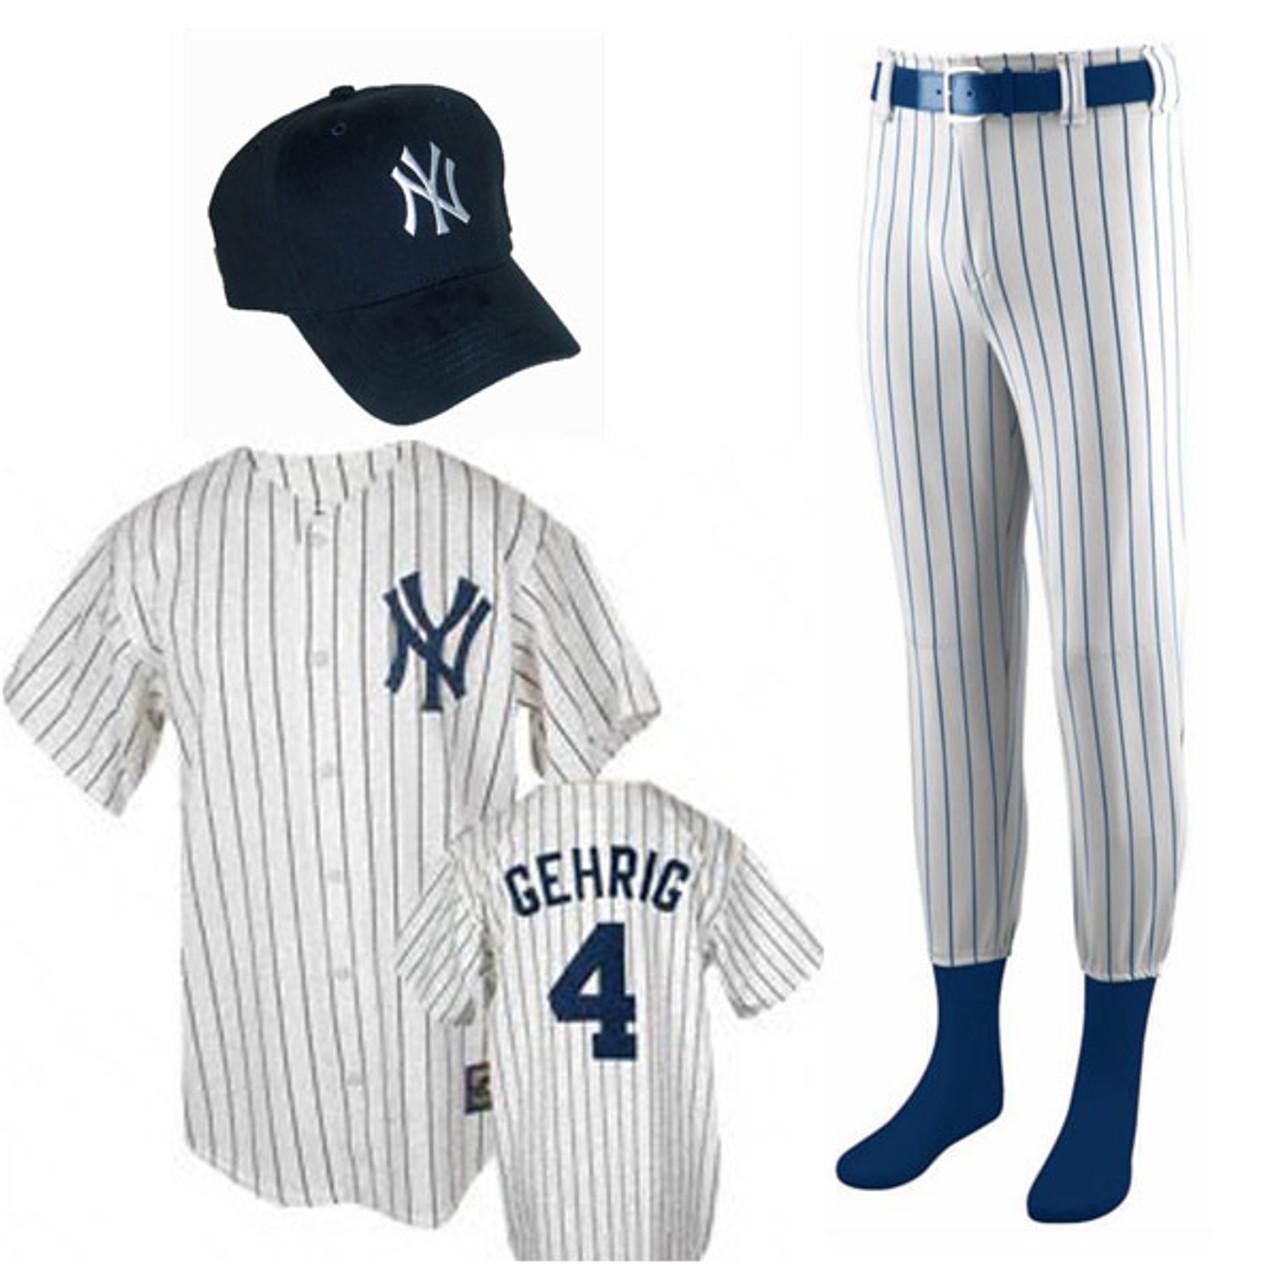 Women's New York Yankees Majestic Lou Gehrig Home Player Jersey